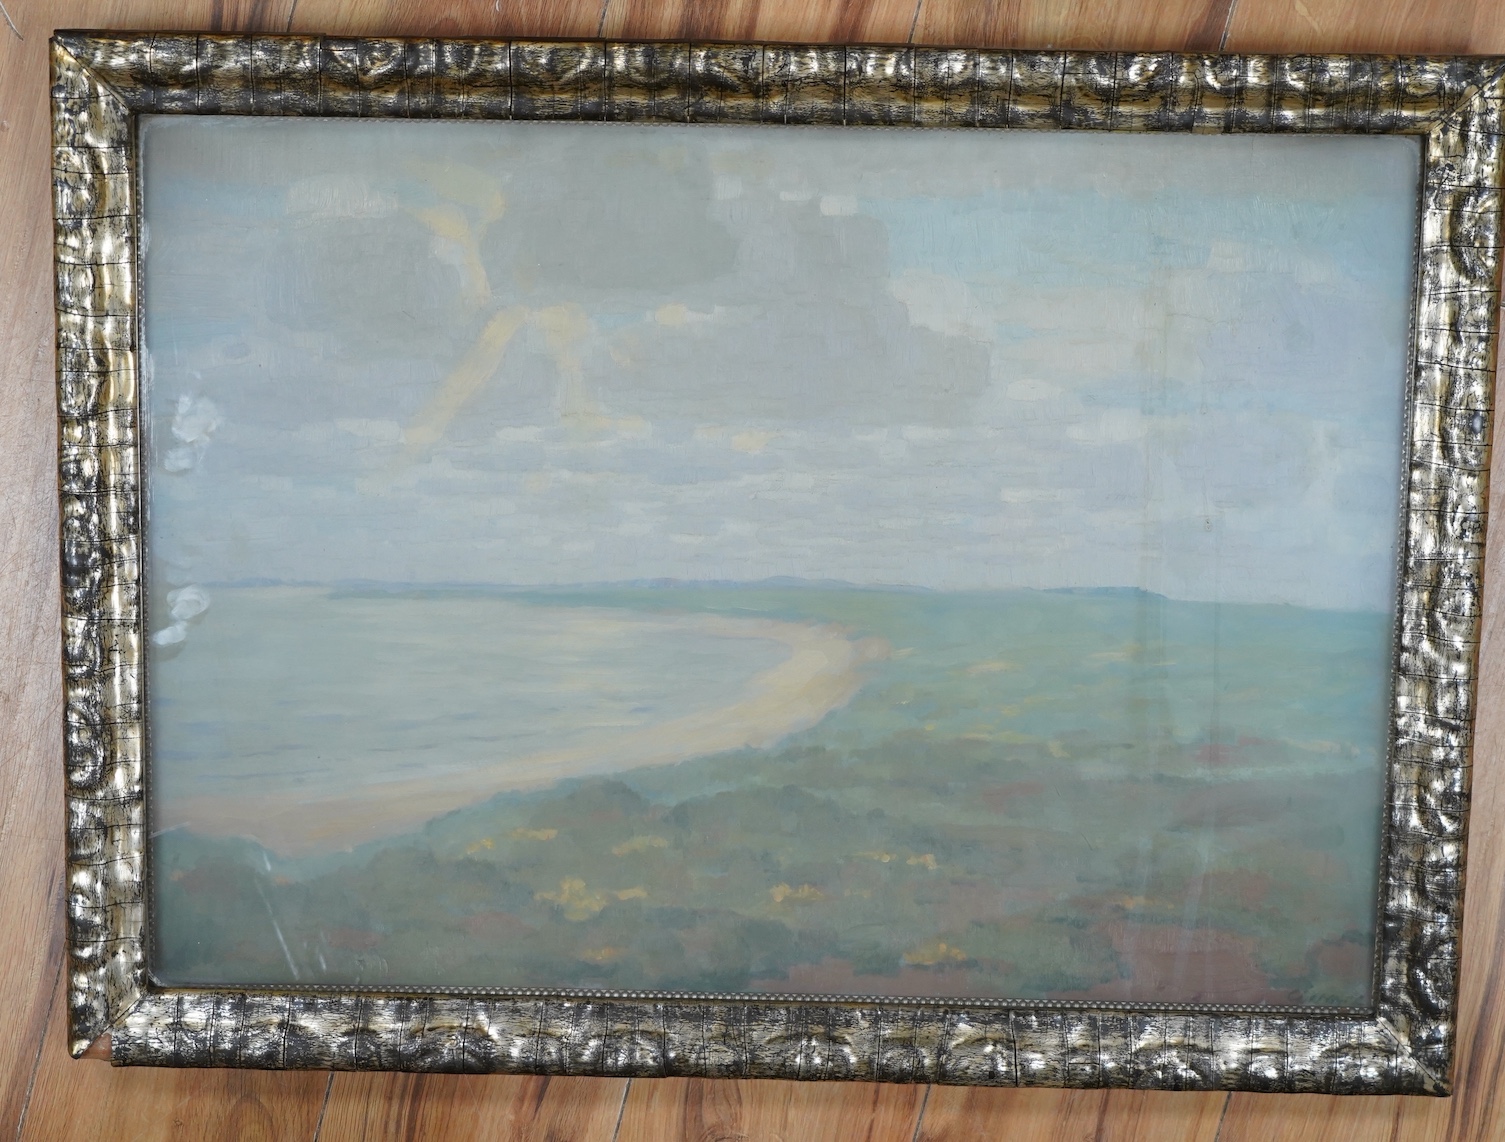 Early 20th century German School, oil on board, Seascape, indistinctly signed lower right, 46.5 x 66cm. Condition - poor to fair, surface dirt all over, losses to the frame